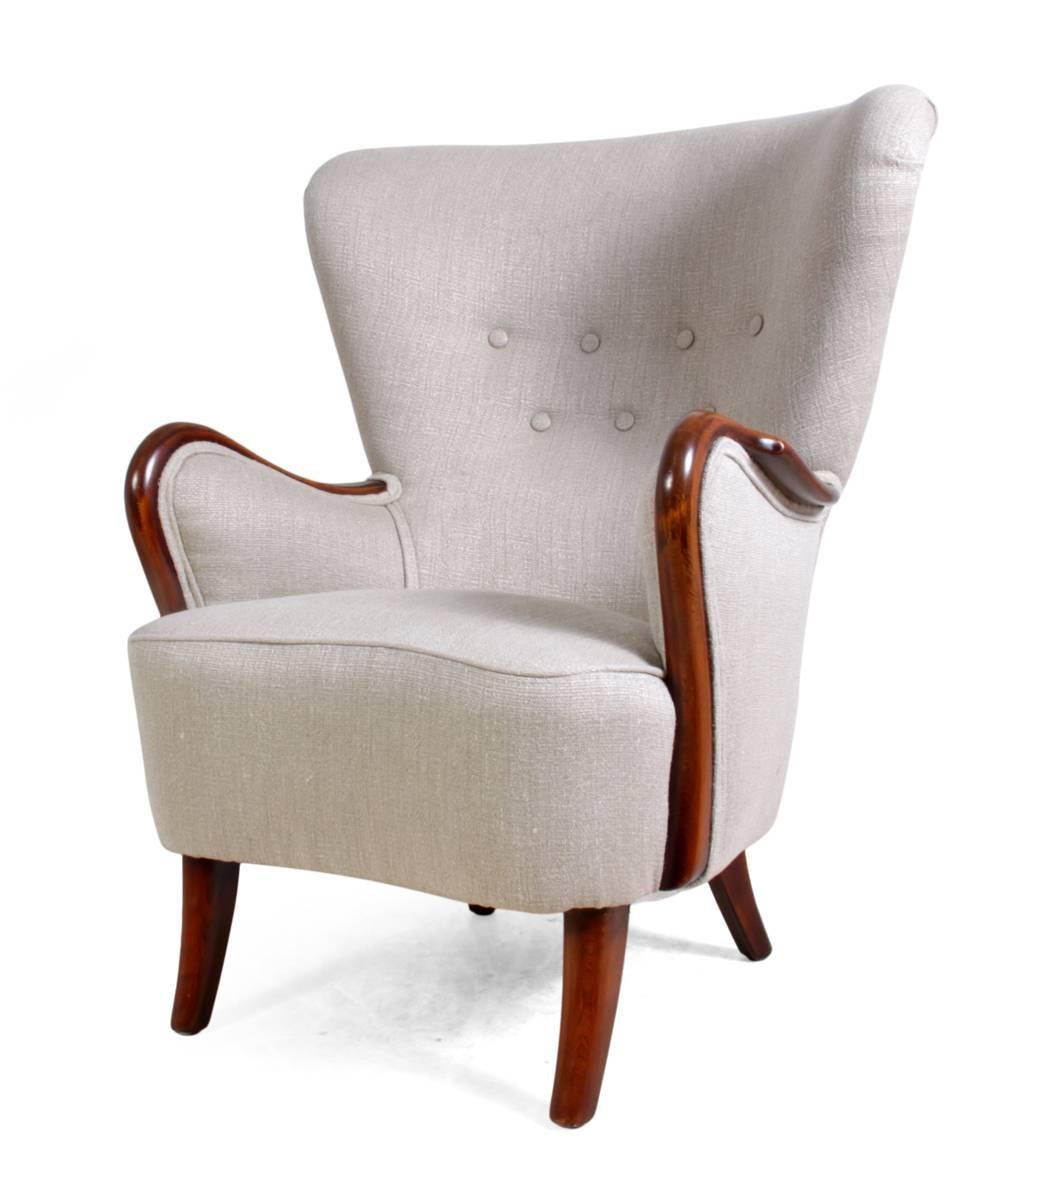 Danish armchair, circa 1940.
An original 1940s, fully restored and upholstered Danish chair. Solid hardwood frame and a shaped back with buttoned detail.
Age: 1940s.
Style: Mid-Century.
Material: Beech.
Condition: Very good.
Dimensions: 100H x